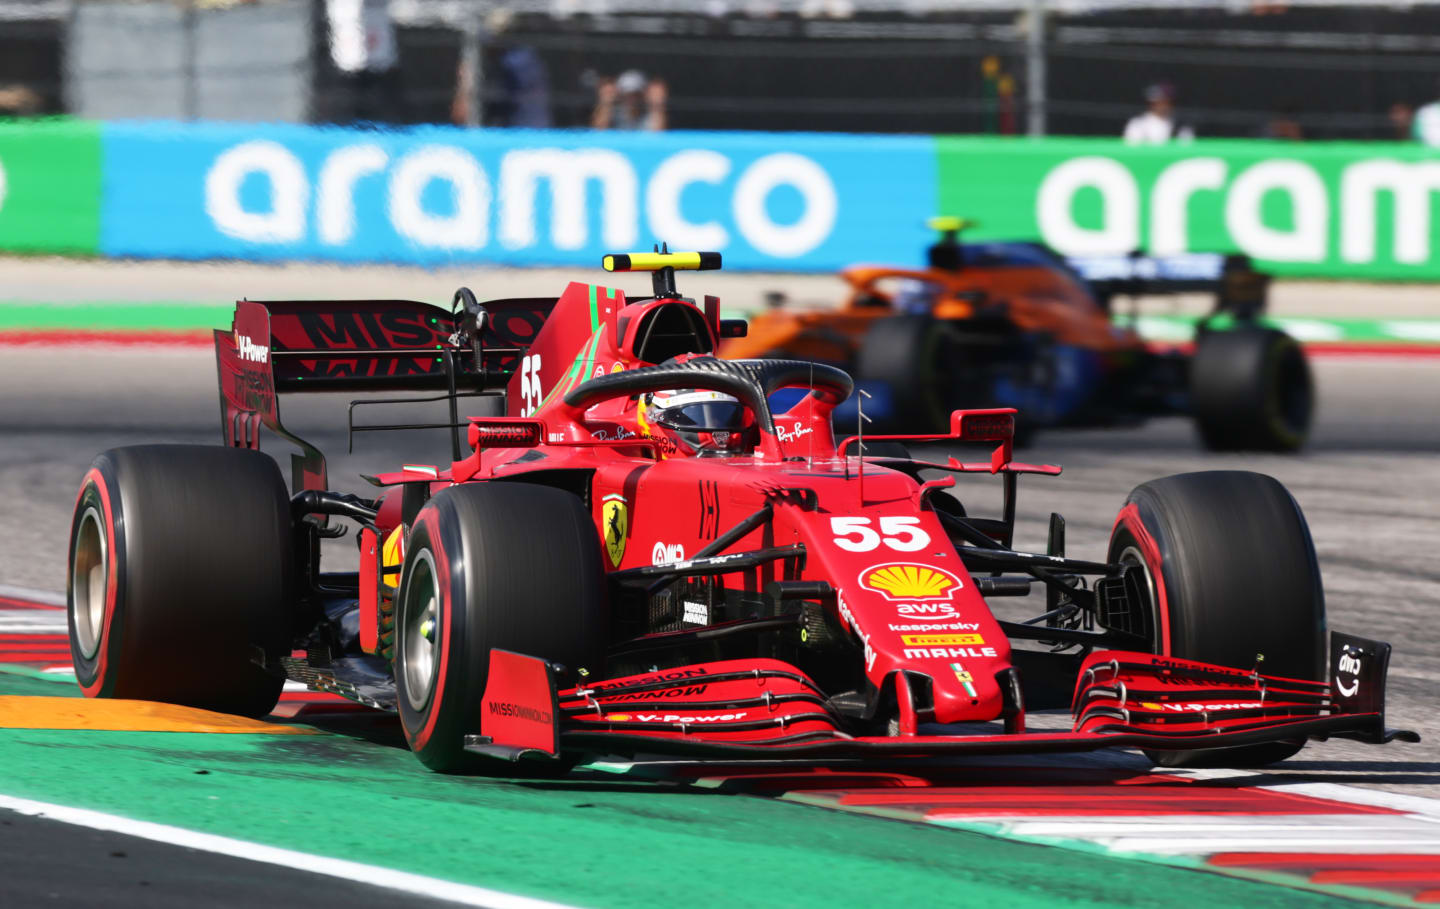 AUSTIN, TEXAS - OCTOBER 24: Carlos Sainz of Spain driving the (55) Scuderia Ferrari SF21 during the F1 Grand Prix of USA at Circuit of The Americas on October 24, 2021 in Austin, Texas. (Photo by Peter Fox/Getty Images)